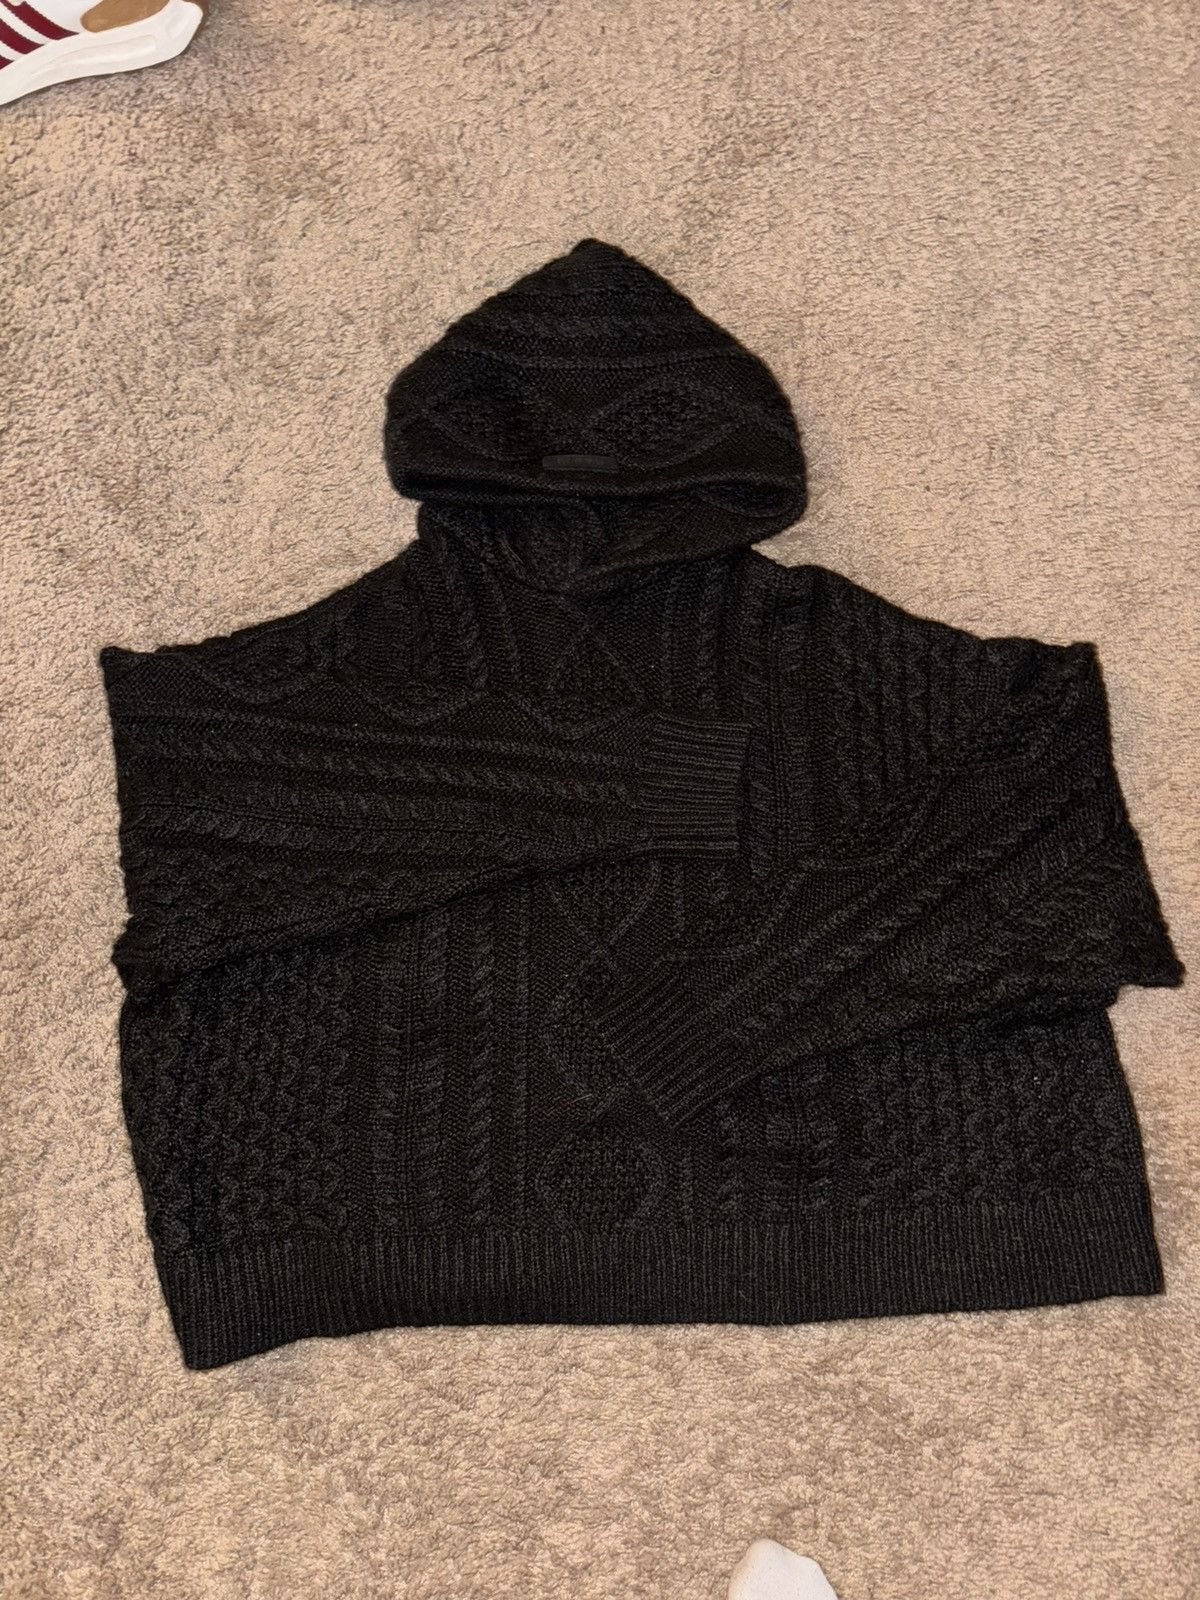 Fear of God Essentials Cable Knit Off Black